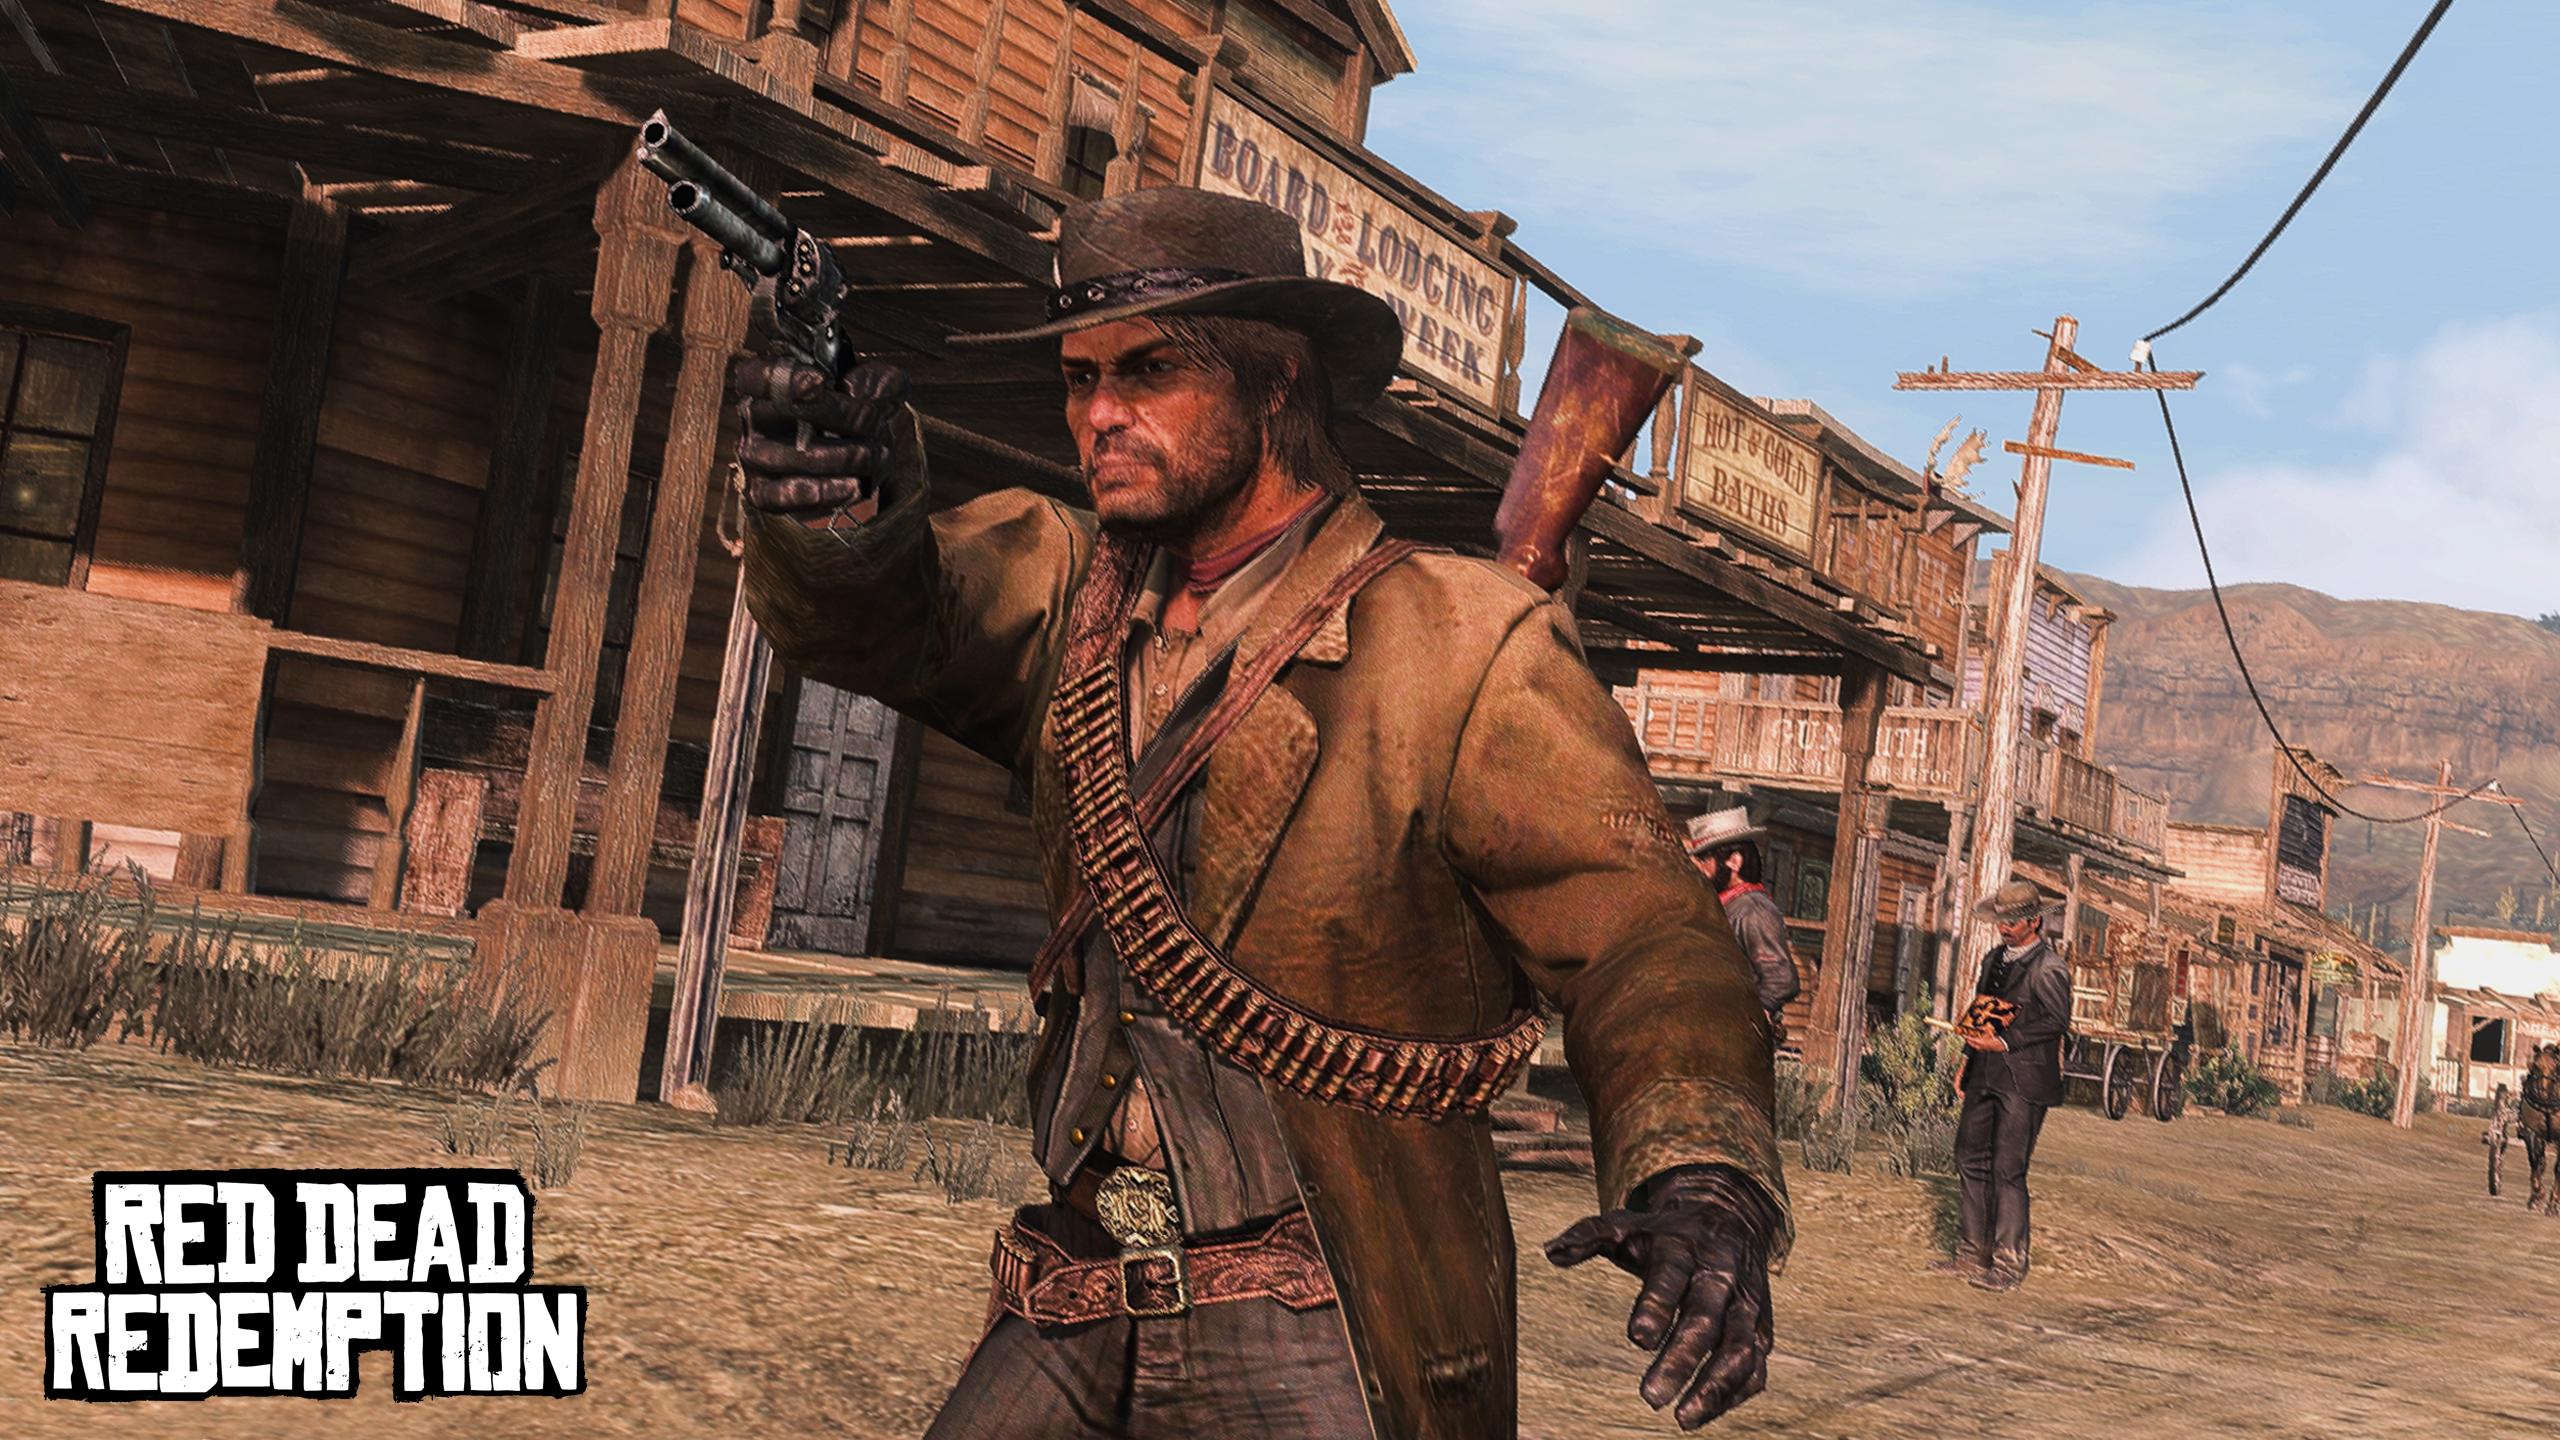 Red Dead Redemption PS4 vs. Switch Comparison: What Is The Difference?